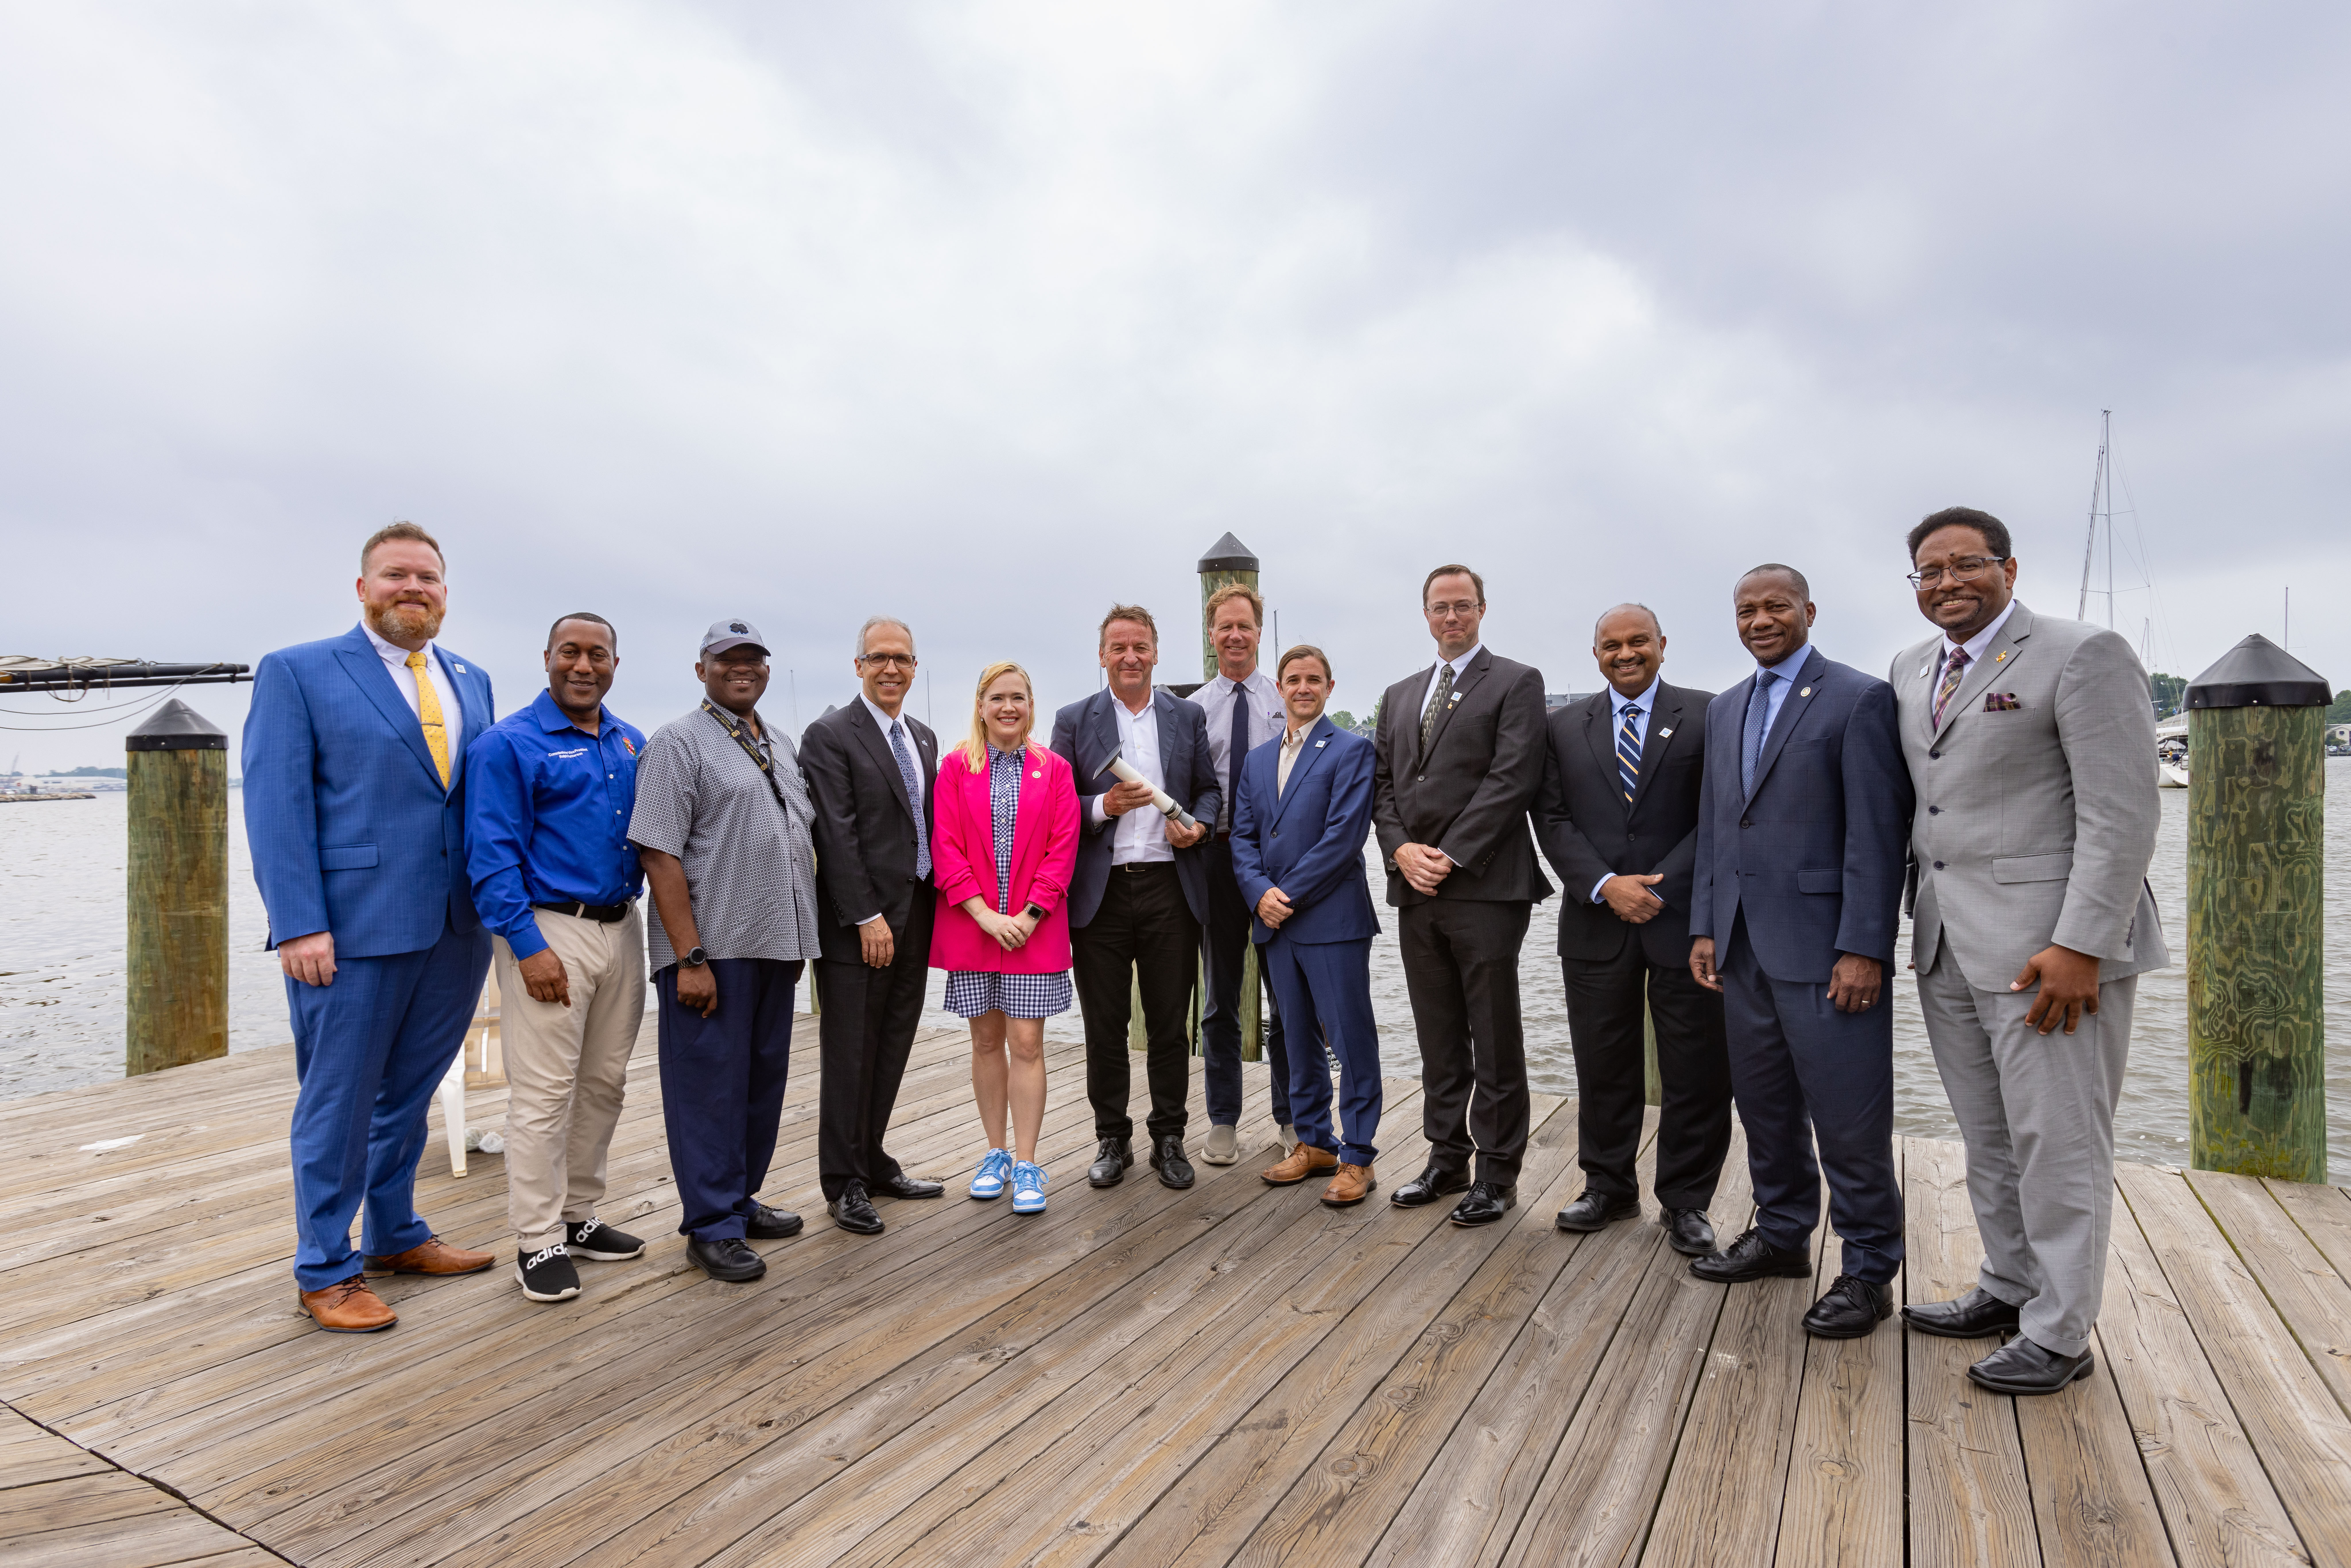 Group of university and public officials standing at Annapolis City Dock